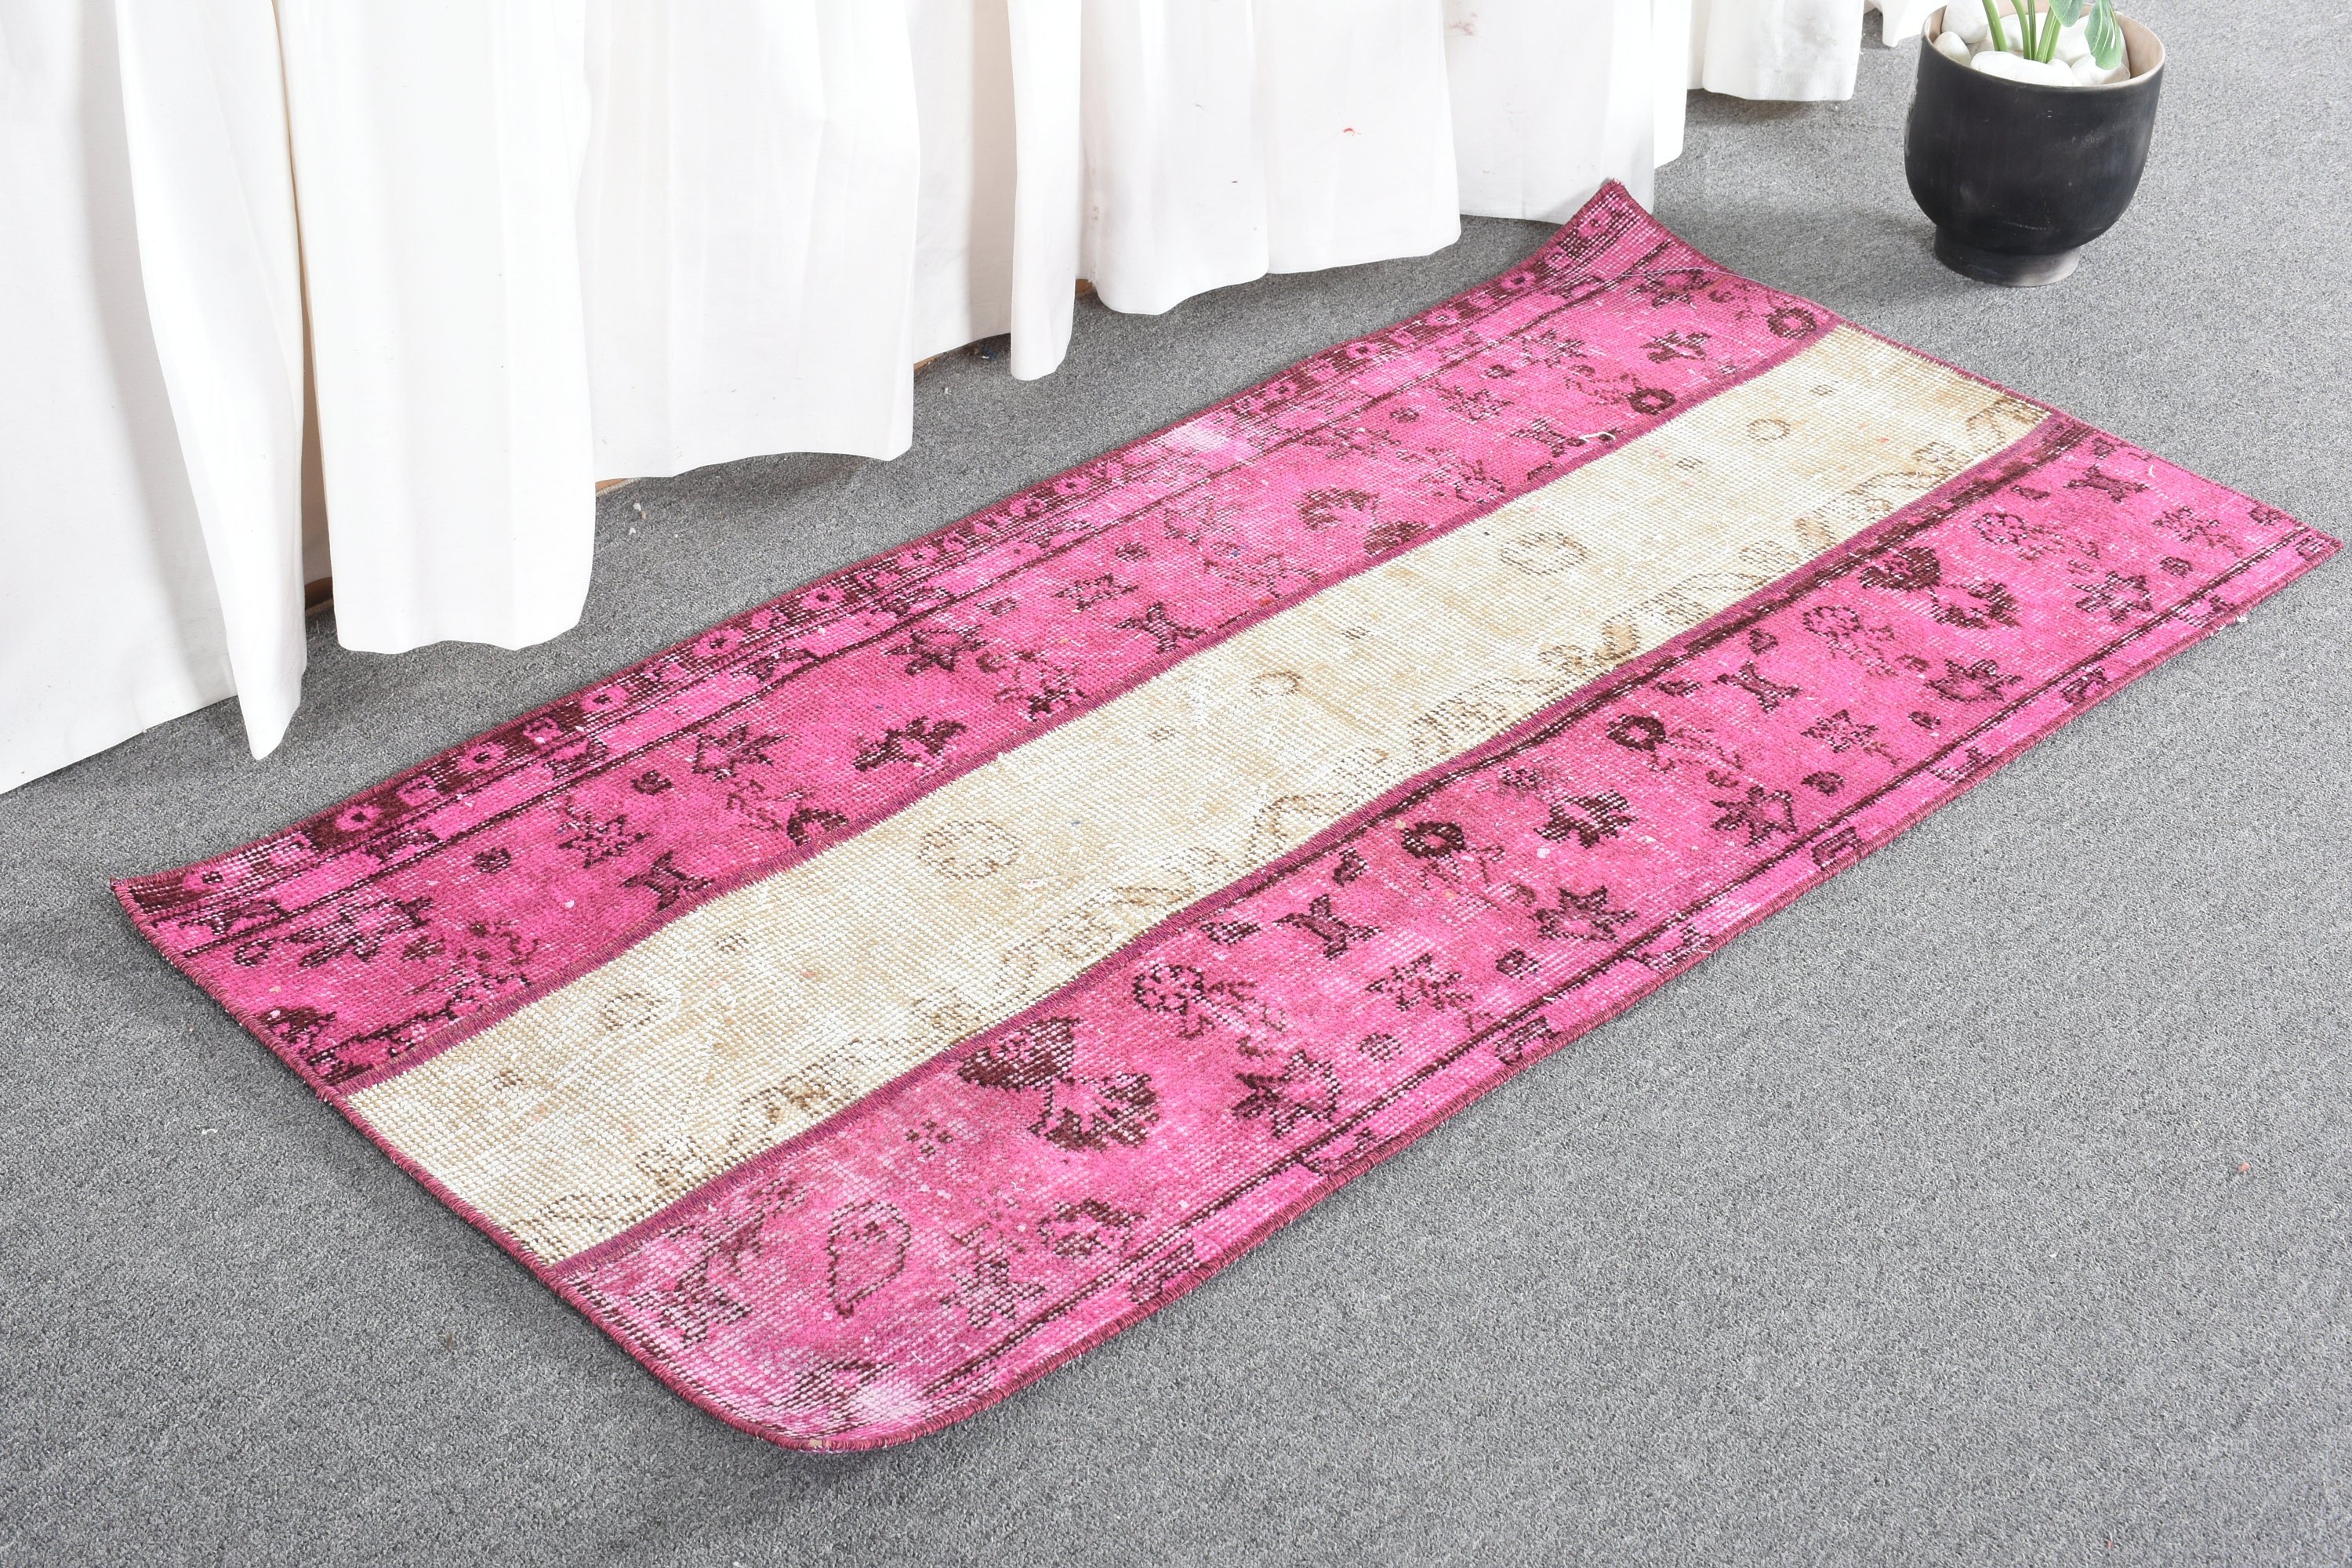 2x4.1 ft Small Rug, Moroccan Rug, Turkish Rug, Vintage Rugs, Rugs for Bath, Wall Hanging Rug, Wool Rugs, Pink Kitchen Rugs, Car Mat Rugs